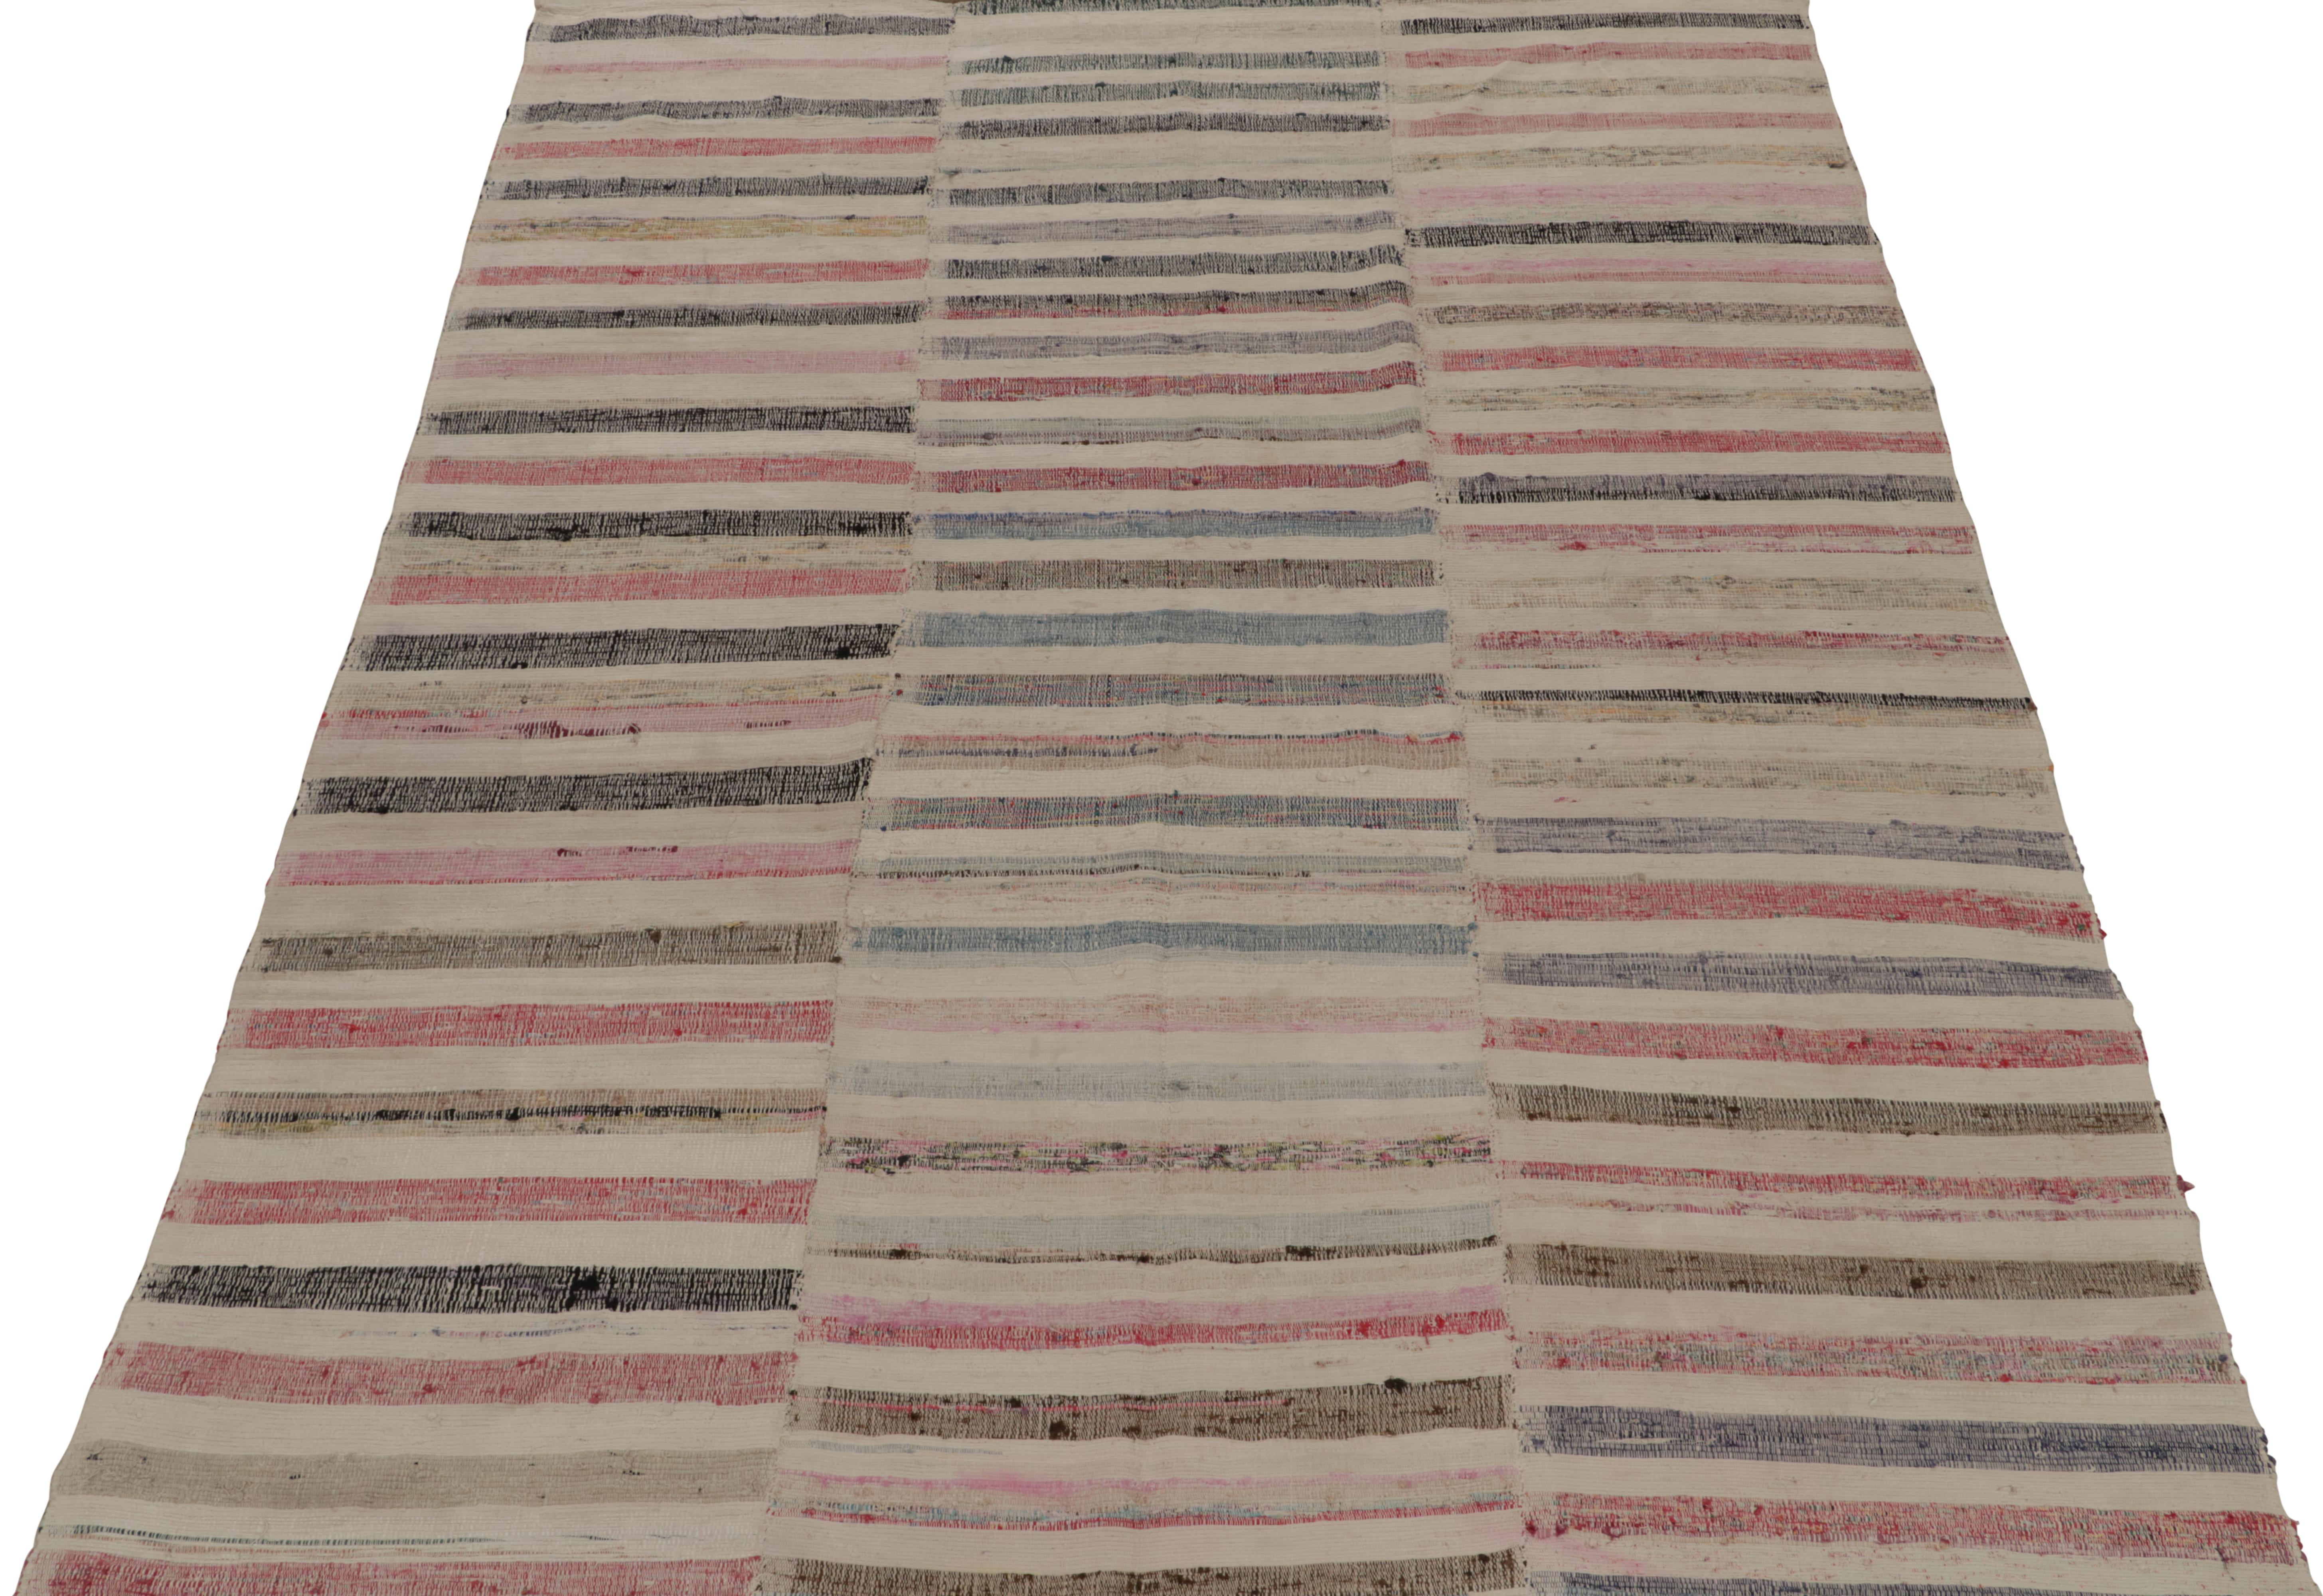 Handwoven in wool, Rug & Kilim presents a 7x10 contemporary rug from their innovative new patchwork kilim collection. 

On the Design: 

This flat weave technique repurposes vintage yarns in polychromatic stripes and striae, achieving a playful